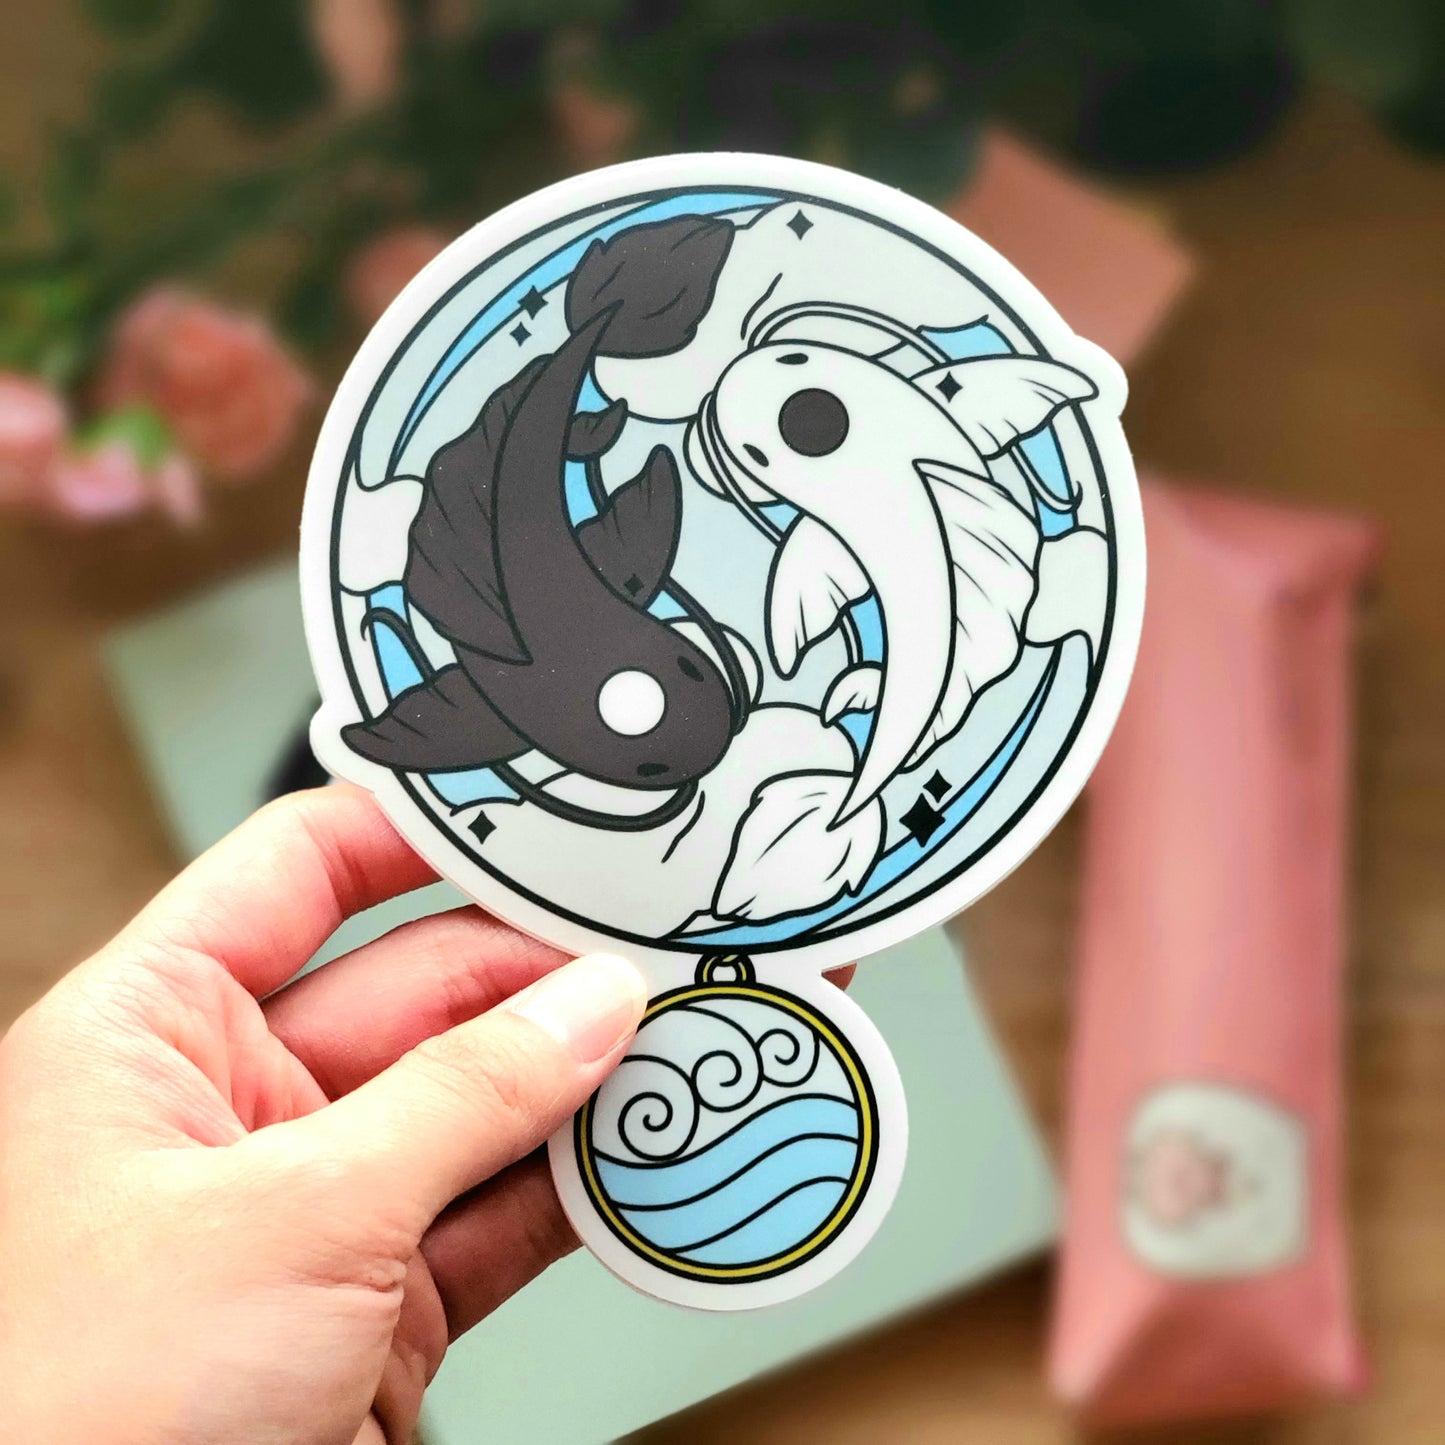 Avatar Stickers for Sale  Element symbols, The last airbender